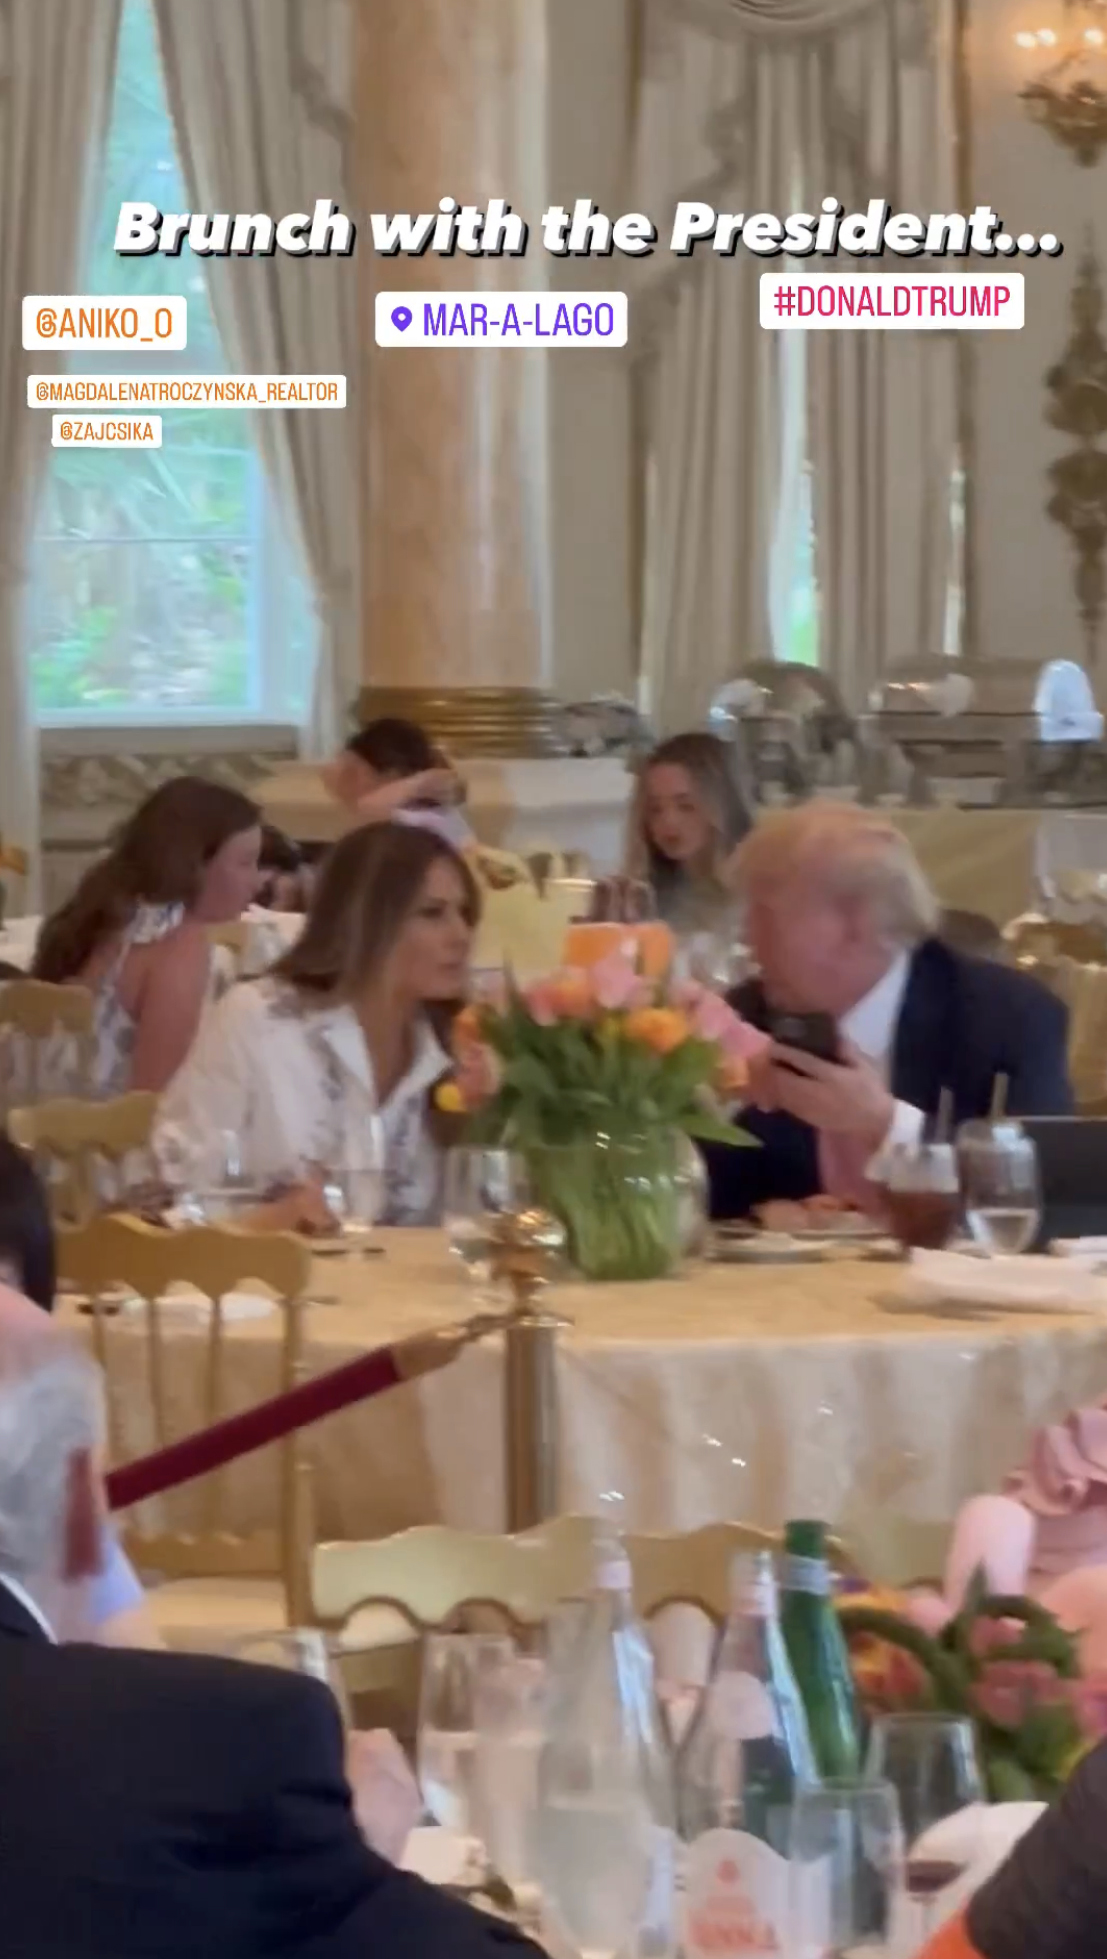 Donald Trump and Melania seen together for first time in months at Mar-a-Lago Halloween party